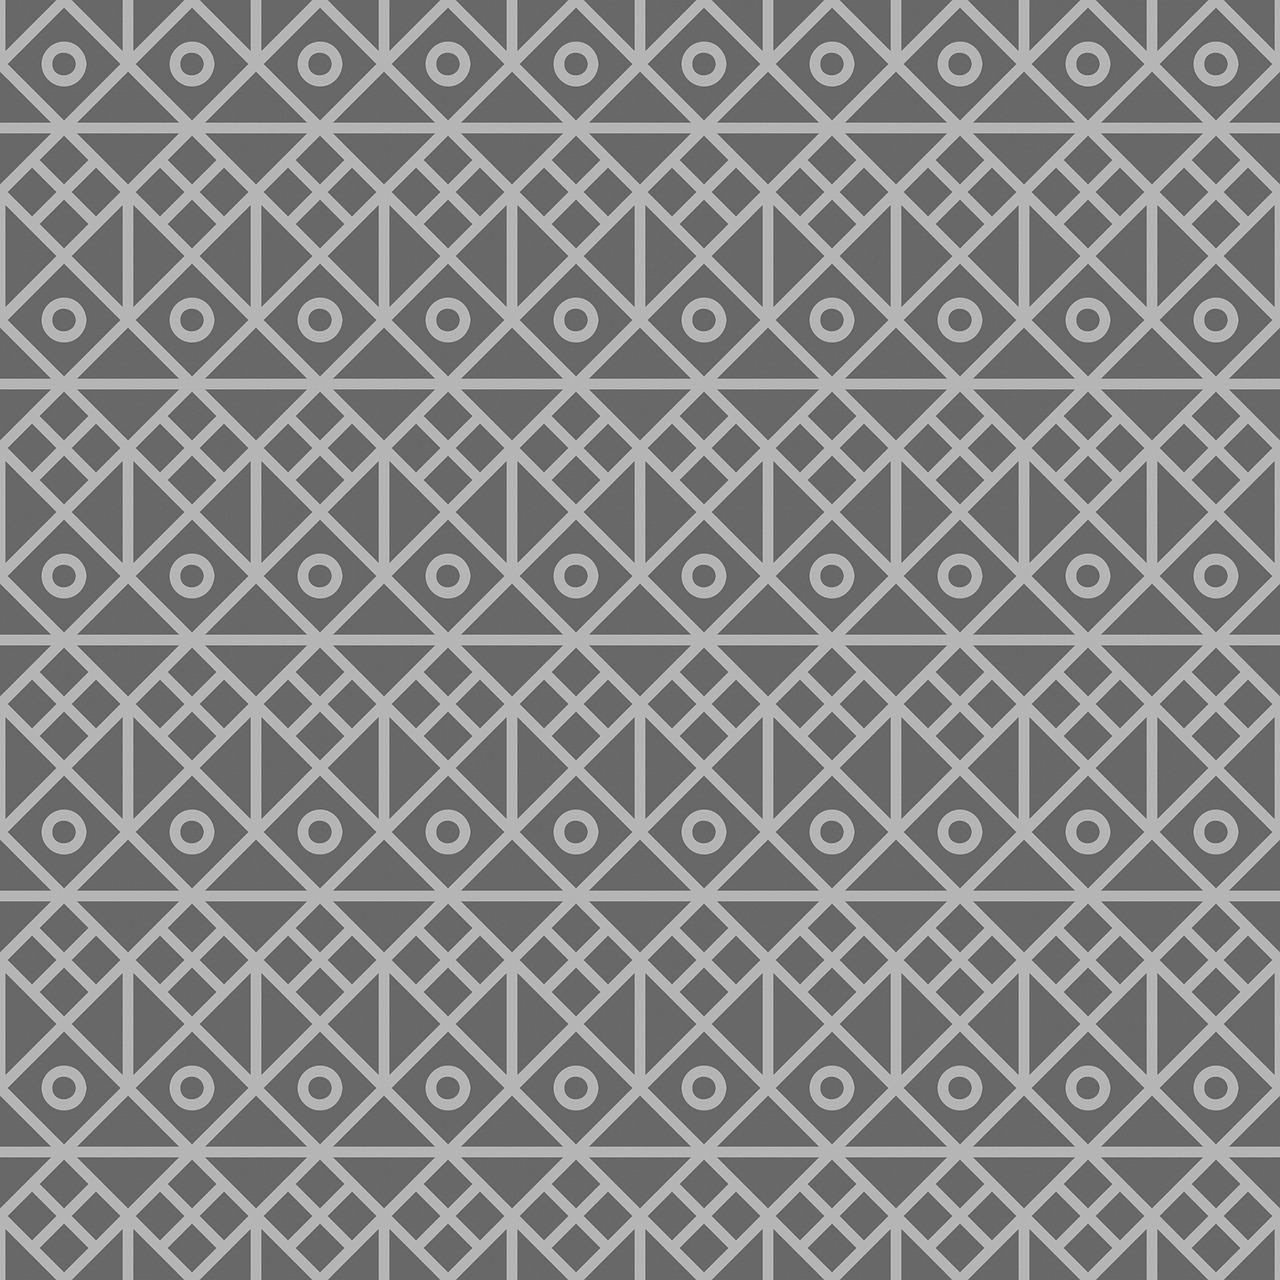 a gray and white geometric pattern, inspired by Norah Neilson Gray, adinkra symbols, triangular elements, square lines, dark gray background